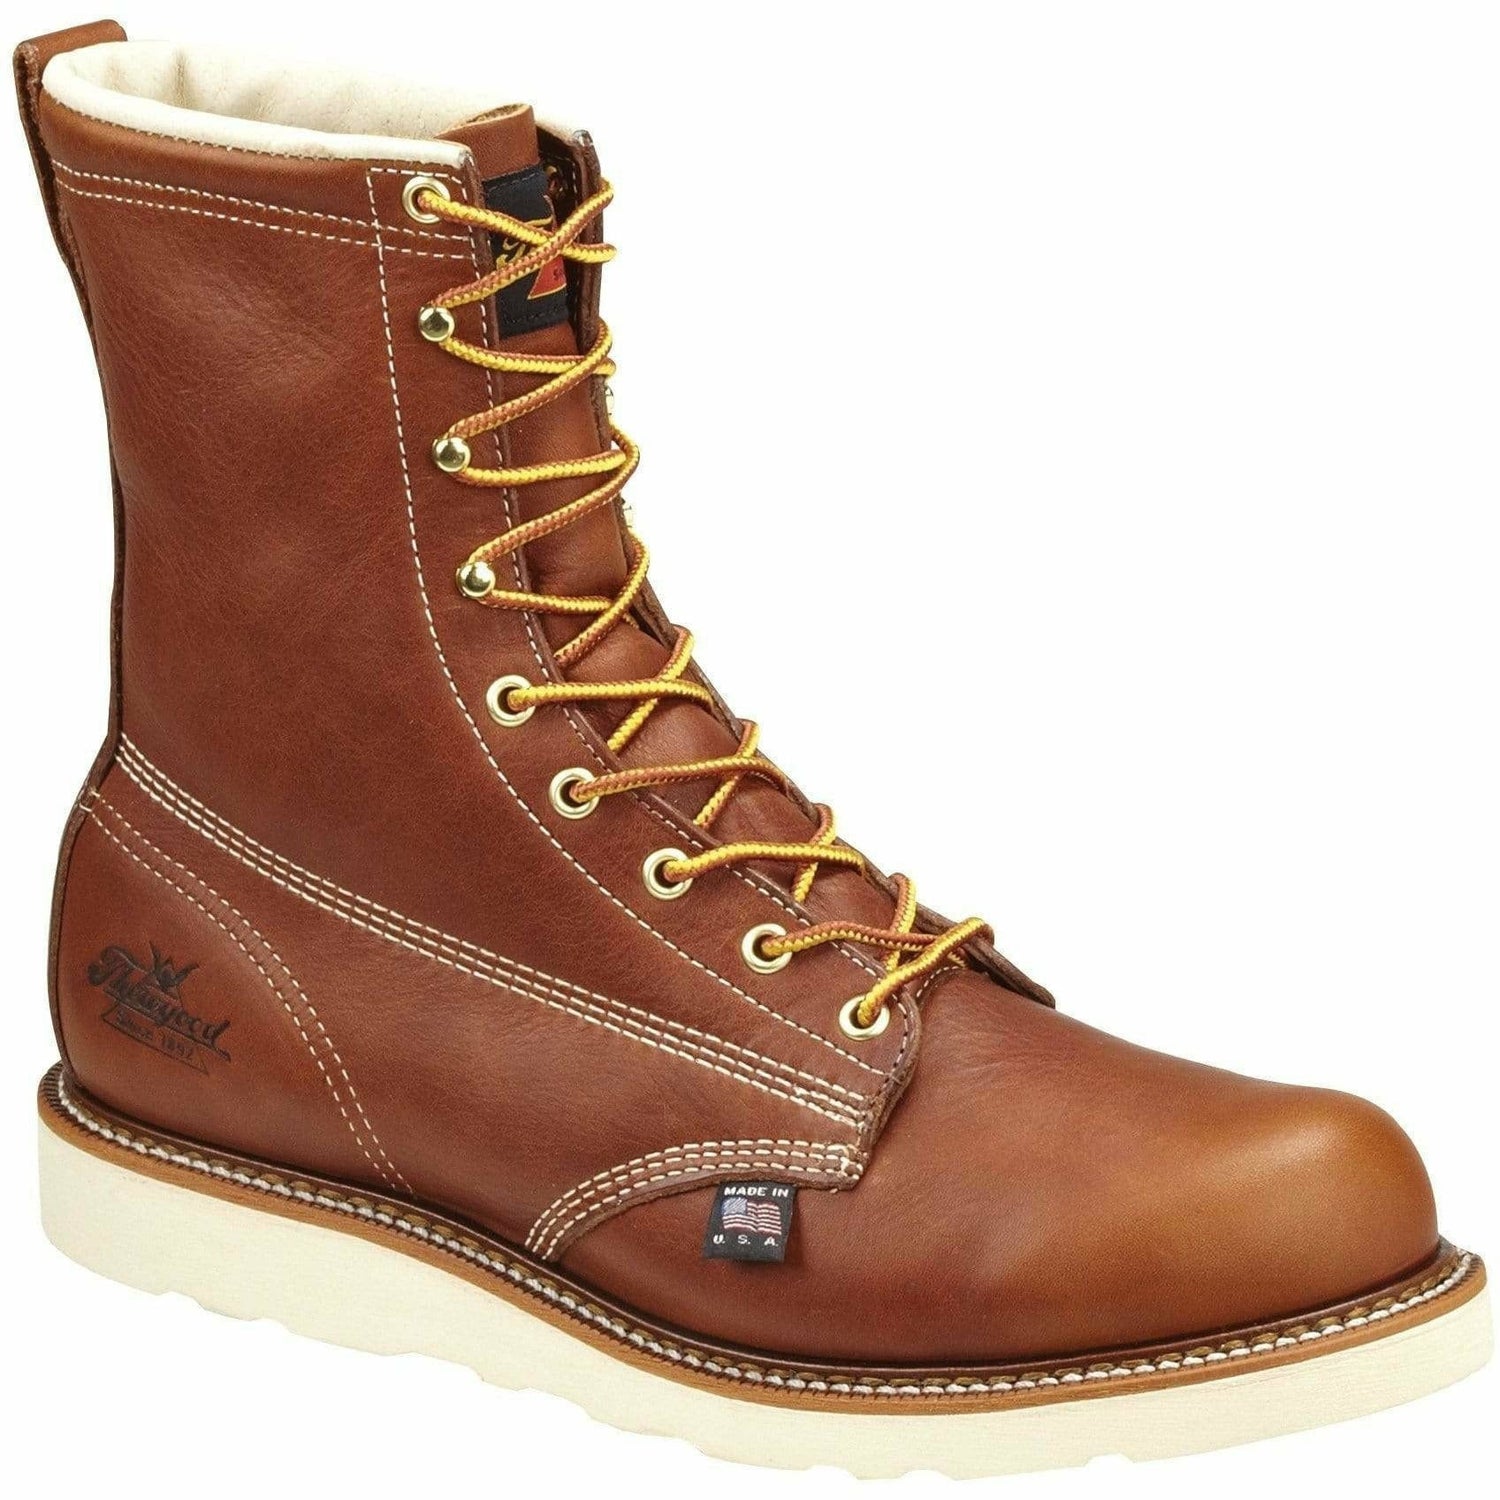 Thorogood American Heritage 8in Round Toe Wedge Boots | GoBros.com